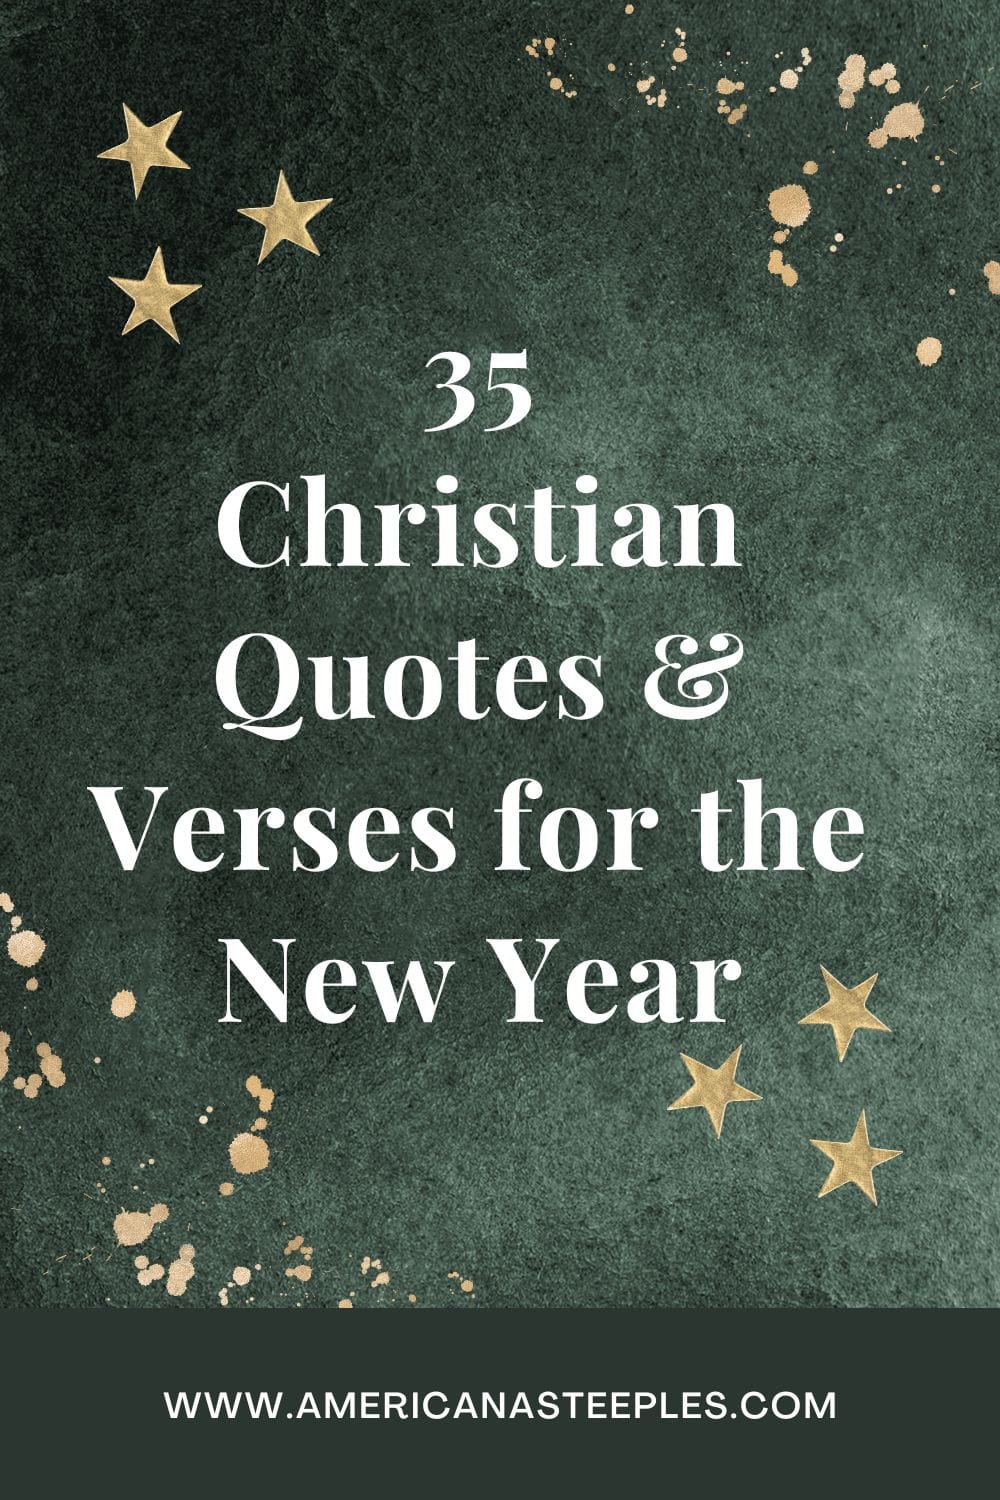 35 Uplifting Christian New Year Quotes for Hope & Faith